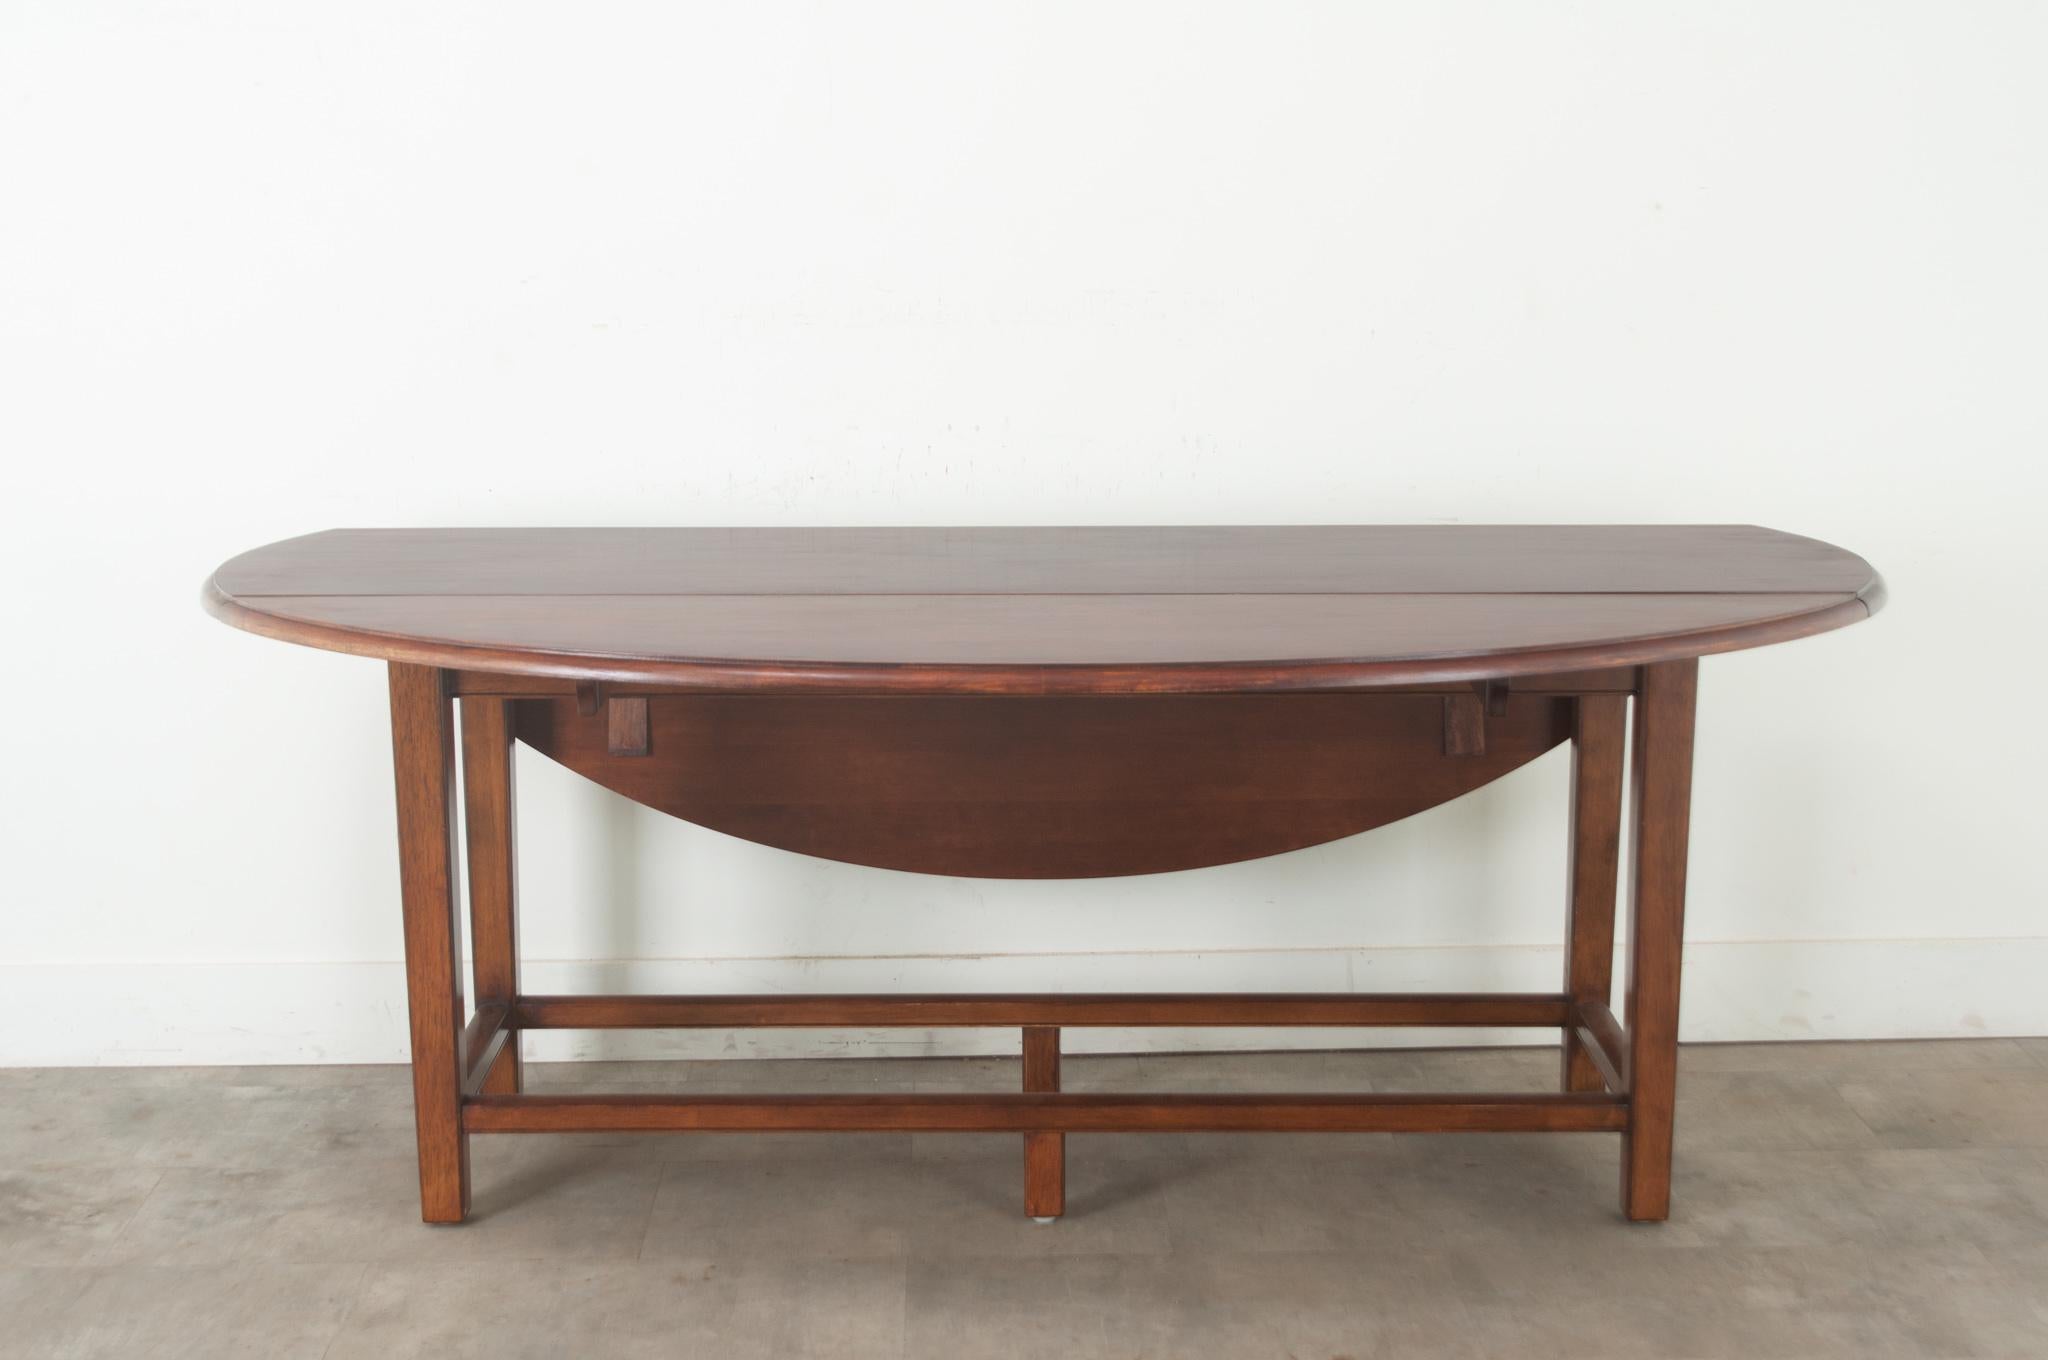 20th Century English Mahogany Drop Leaf Oval Dining Table For Sale